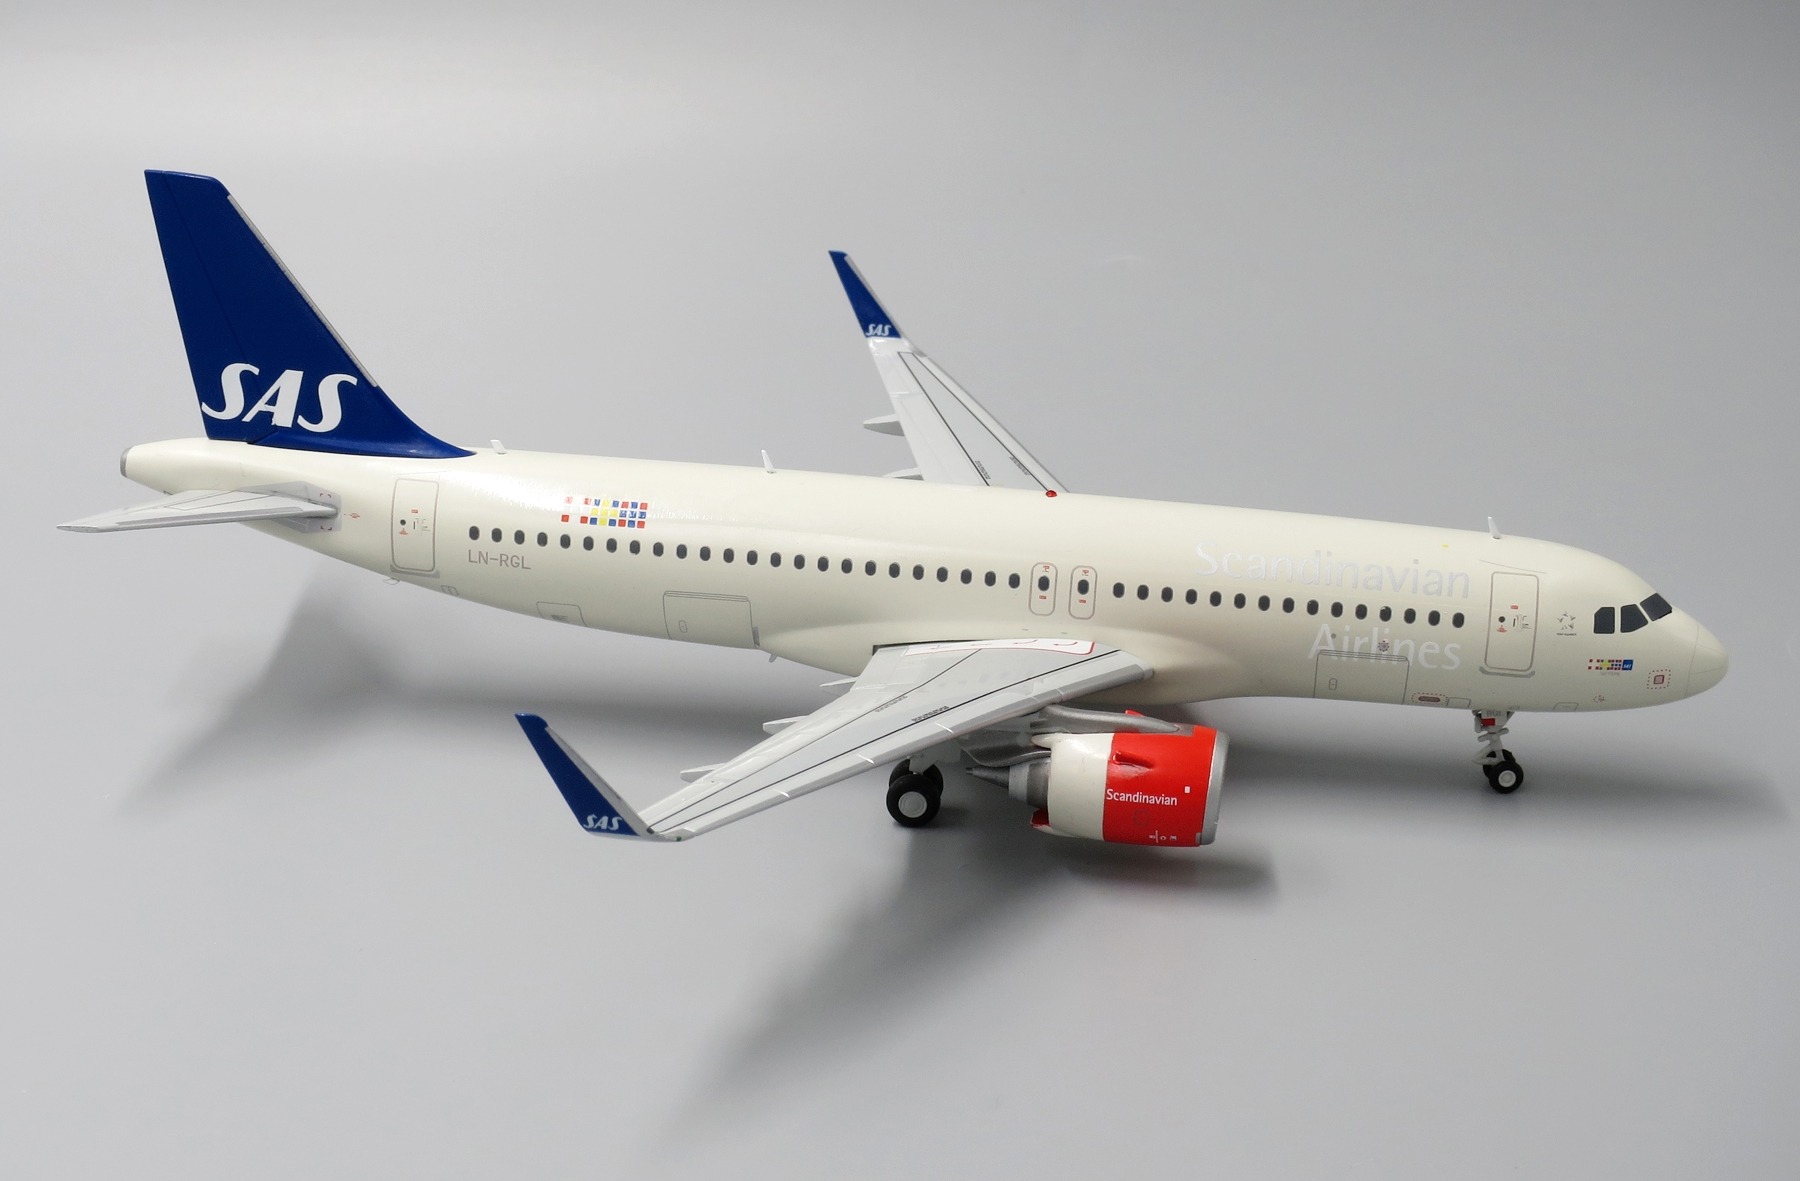 Airbus A320neo Release Date